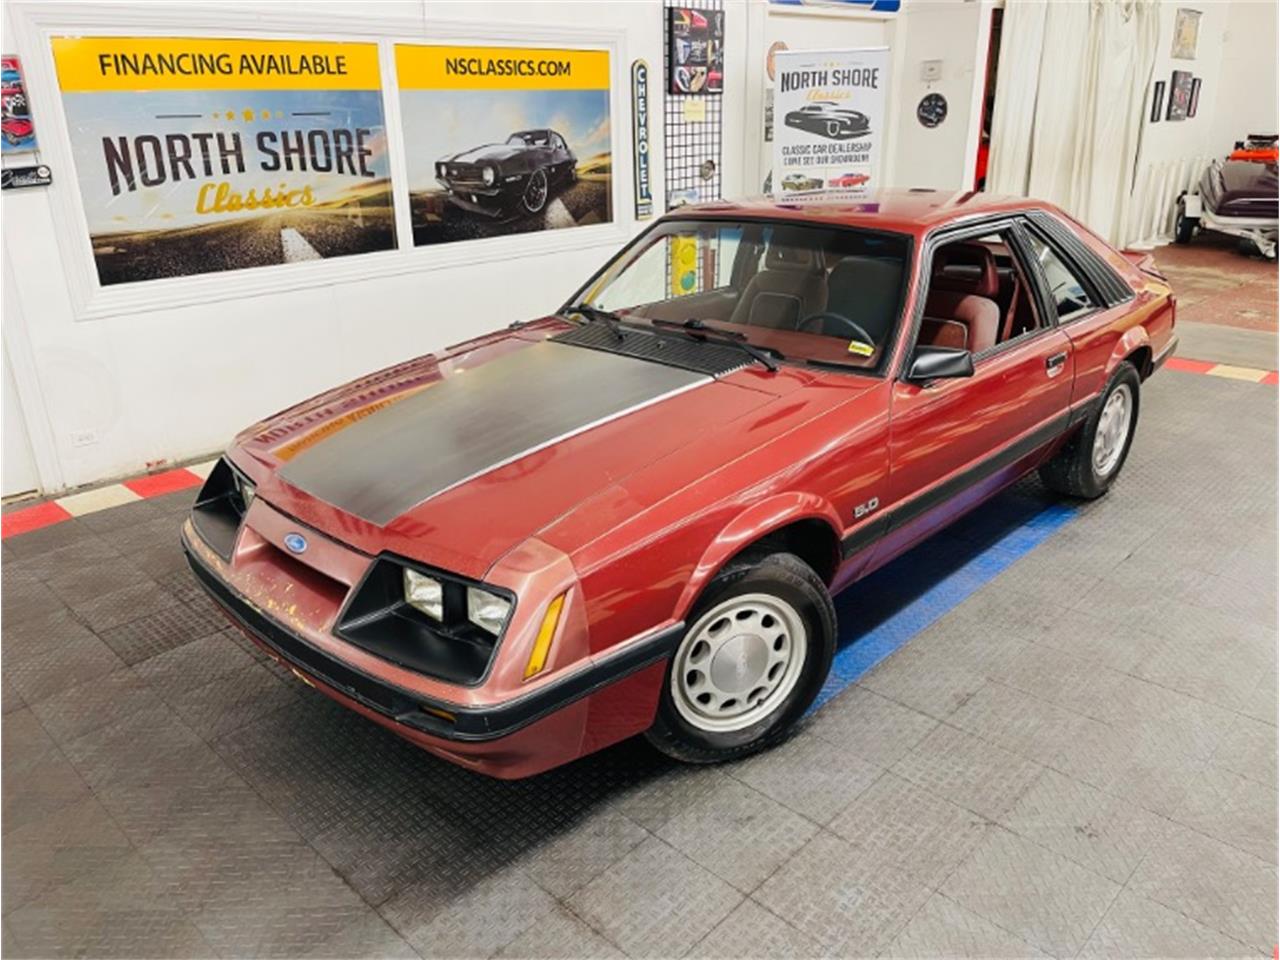 For Sale: 1986 Ford Mustang in Mundelein, Illinois for sale in Mundelein, IL